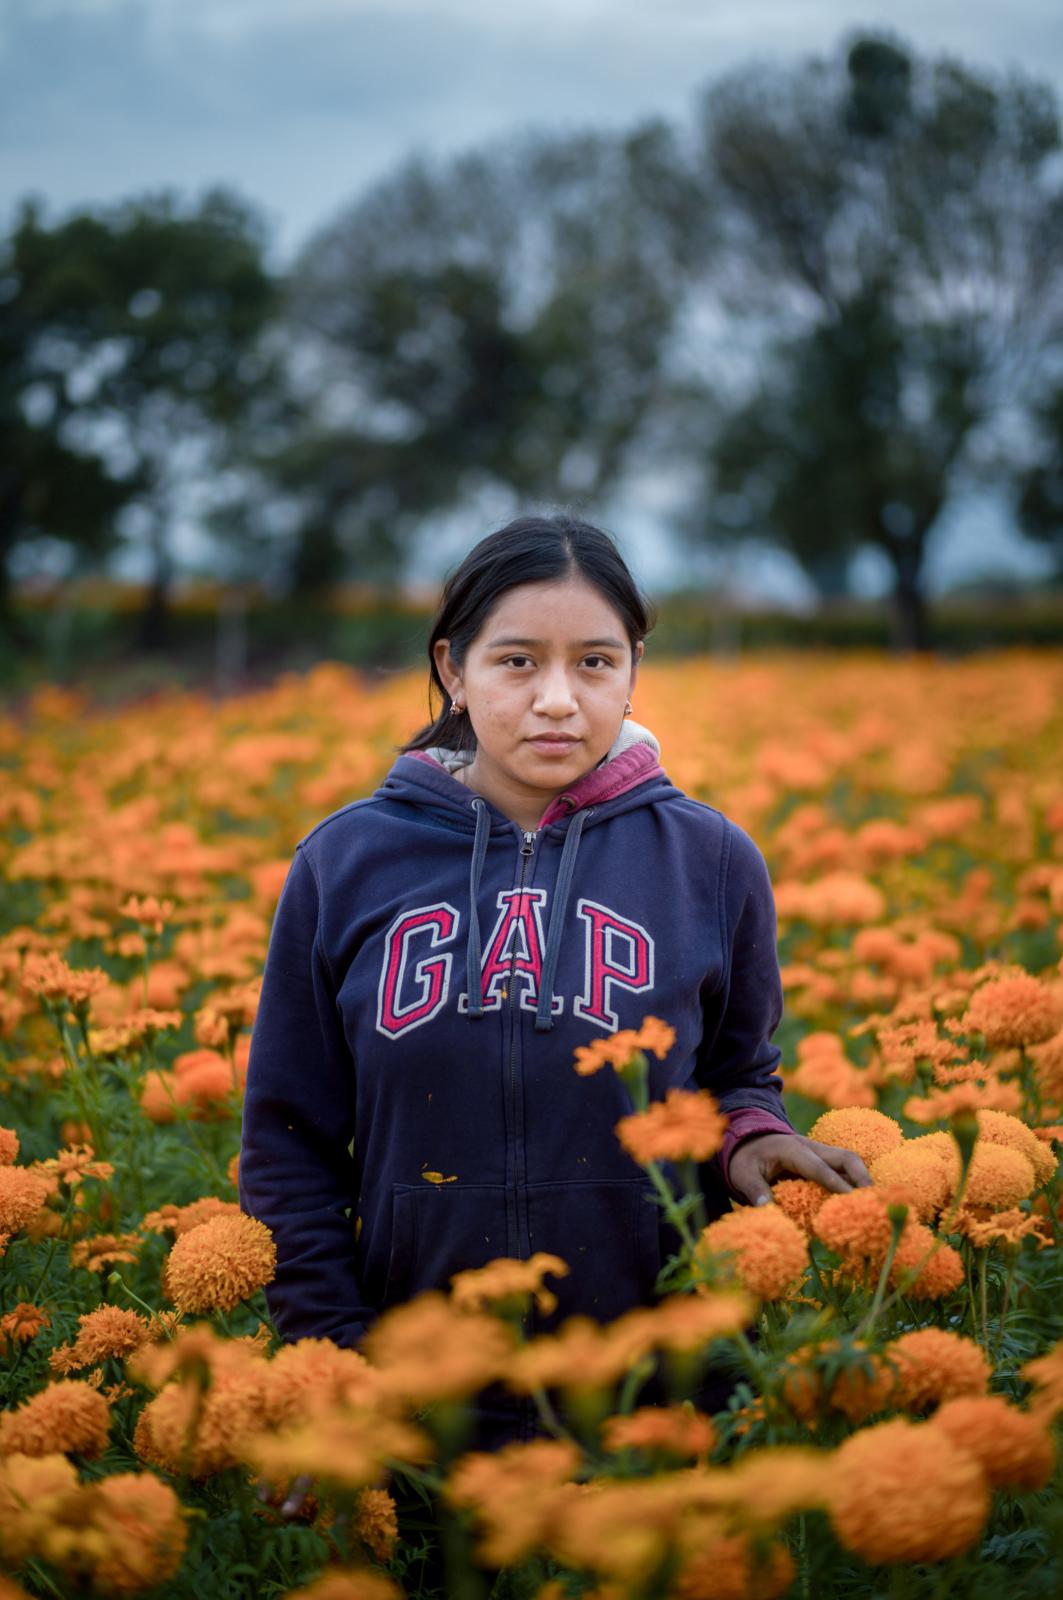 NPR - Meet the families harvesting the flowers that guide souls home on the Day of the Dead